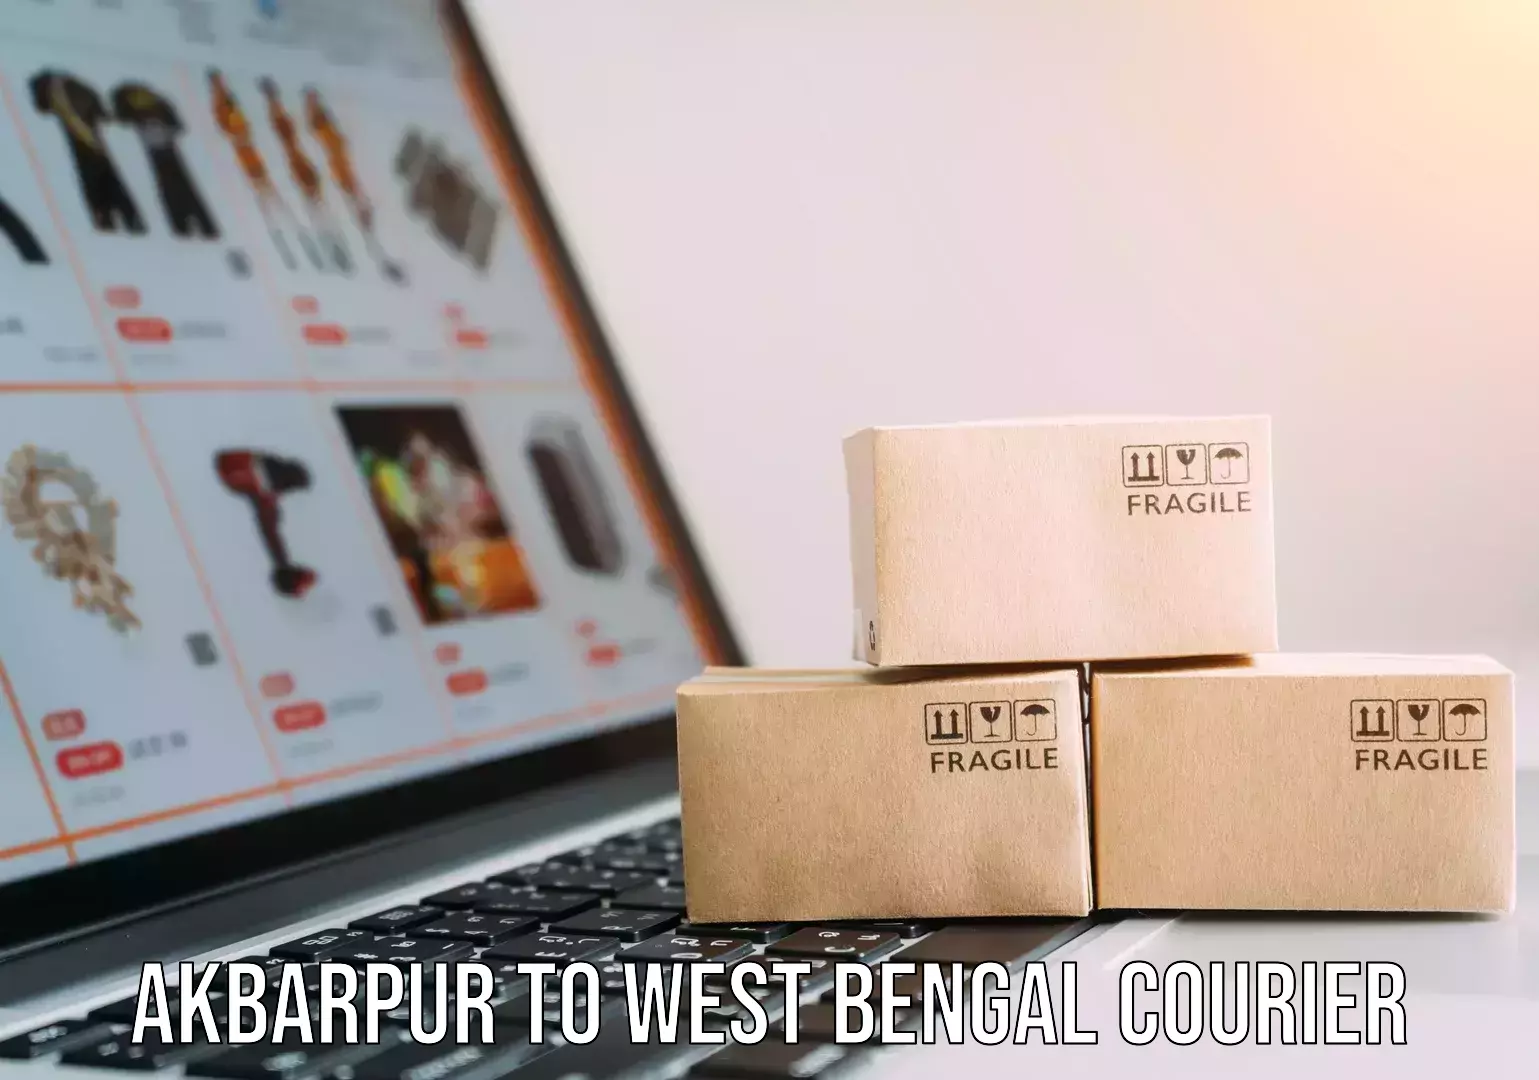 Modern delivery technologies Akbarpur to West Bengal